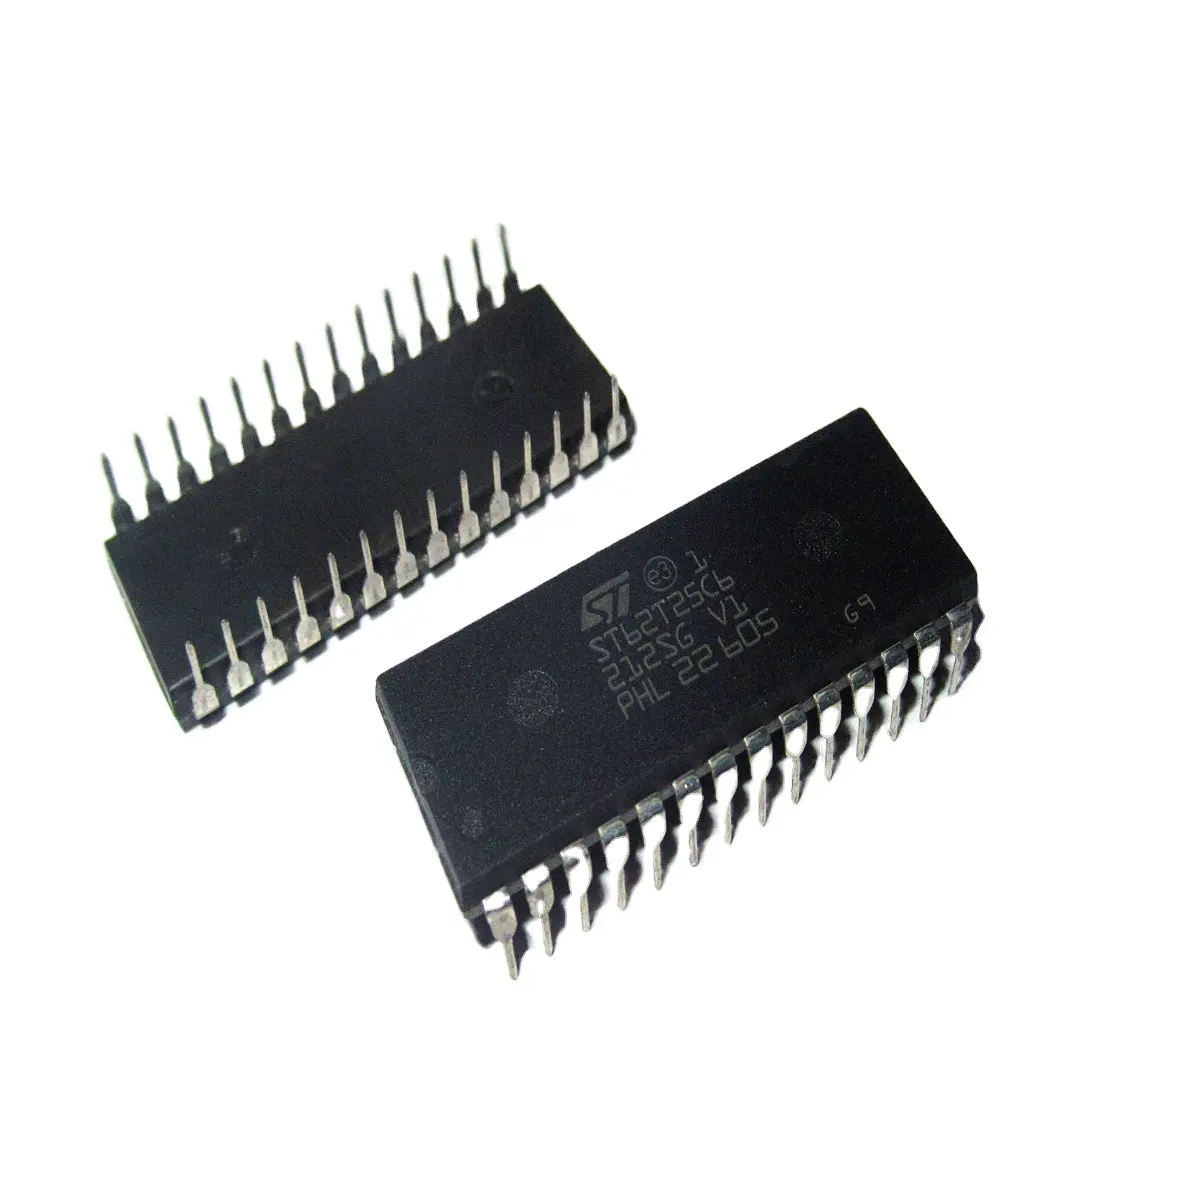 WD1772-PH Electronic Components & Supplies electronic parts